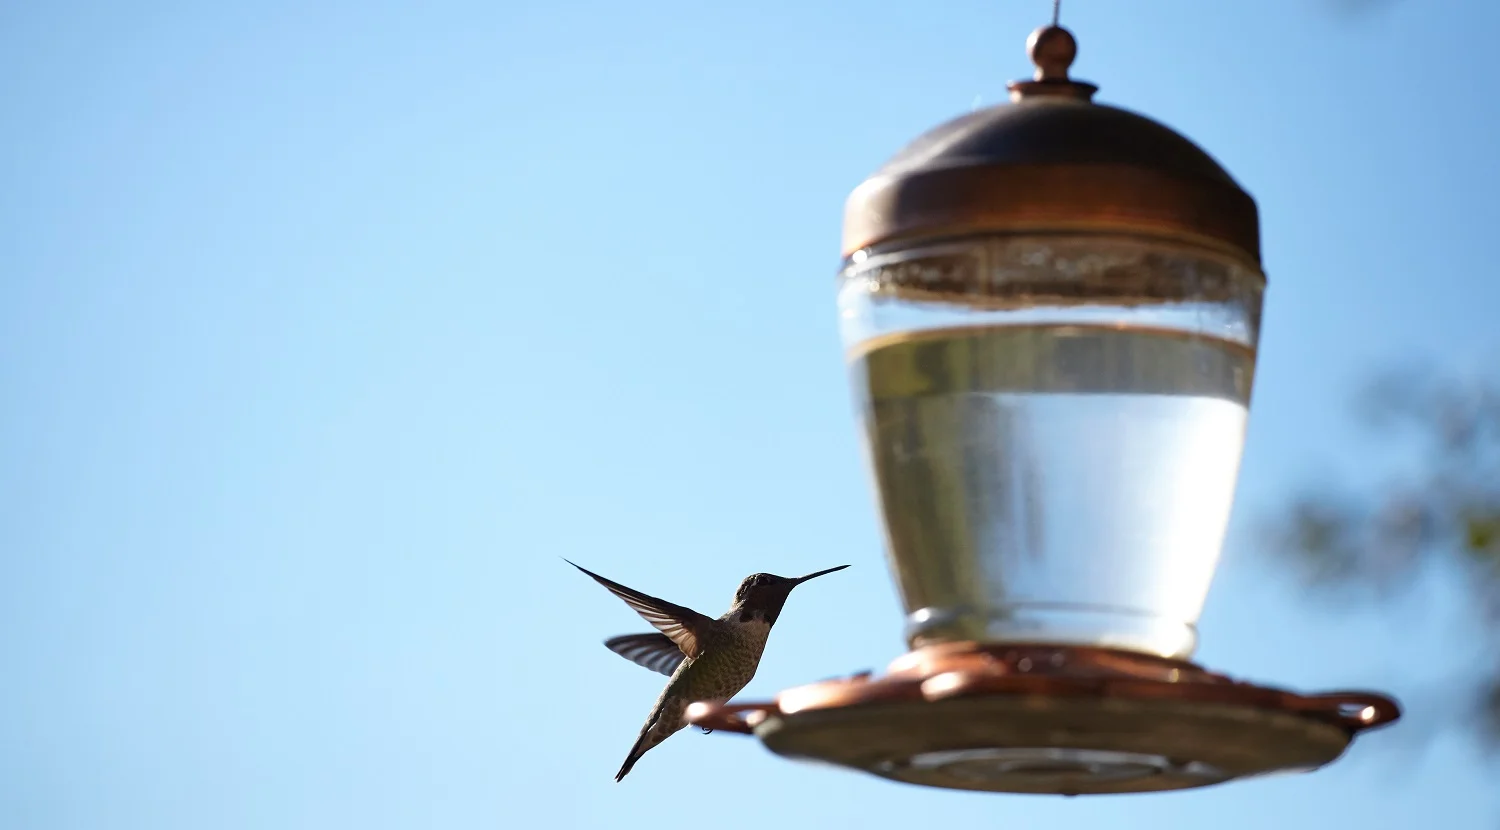 A closeup shot of a beautiful hummingbird sitting on a lamp with blurred background